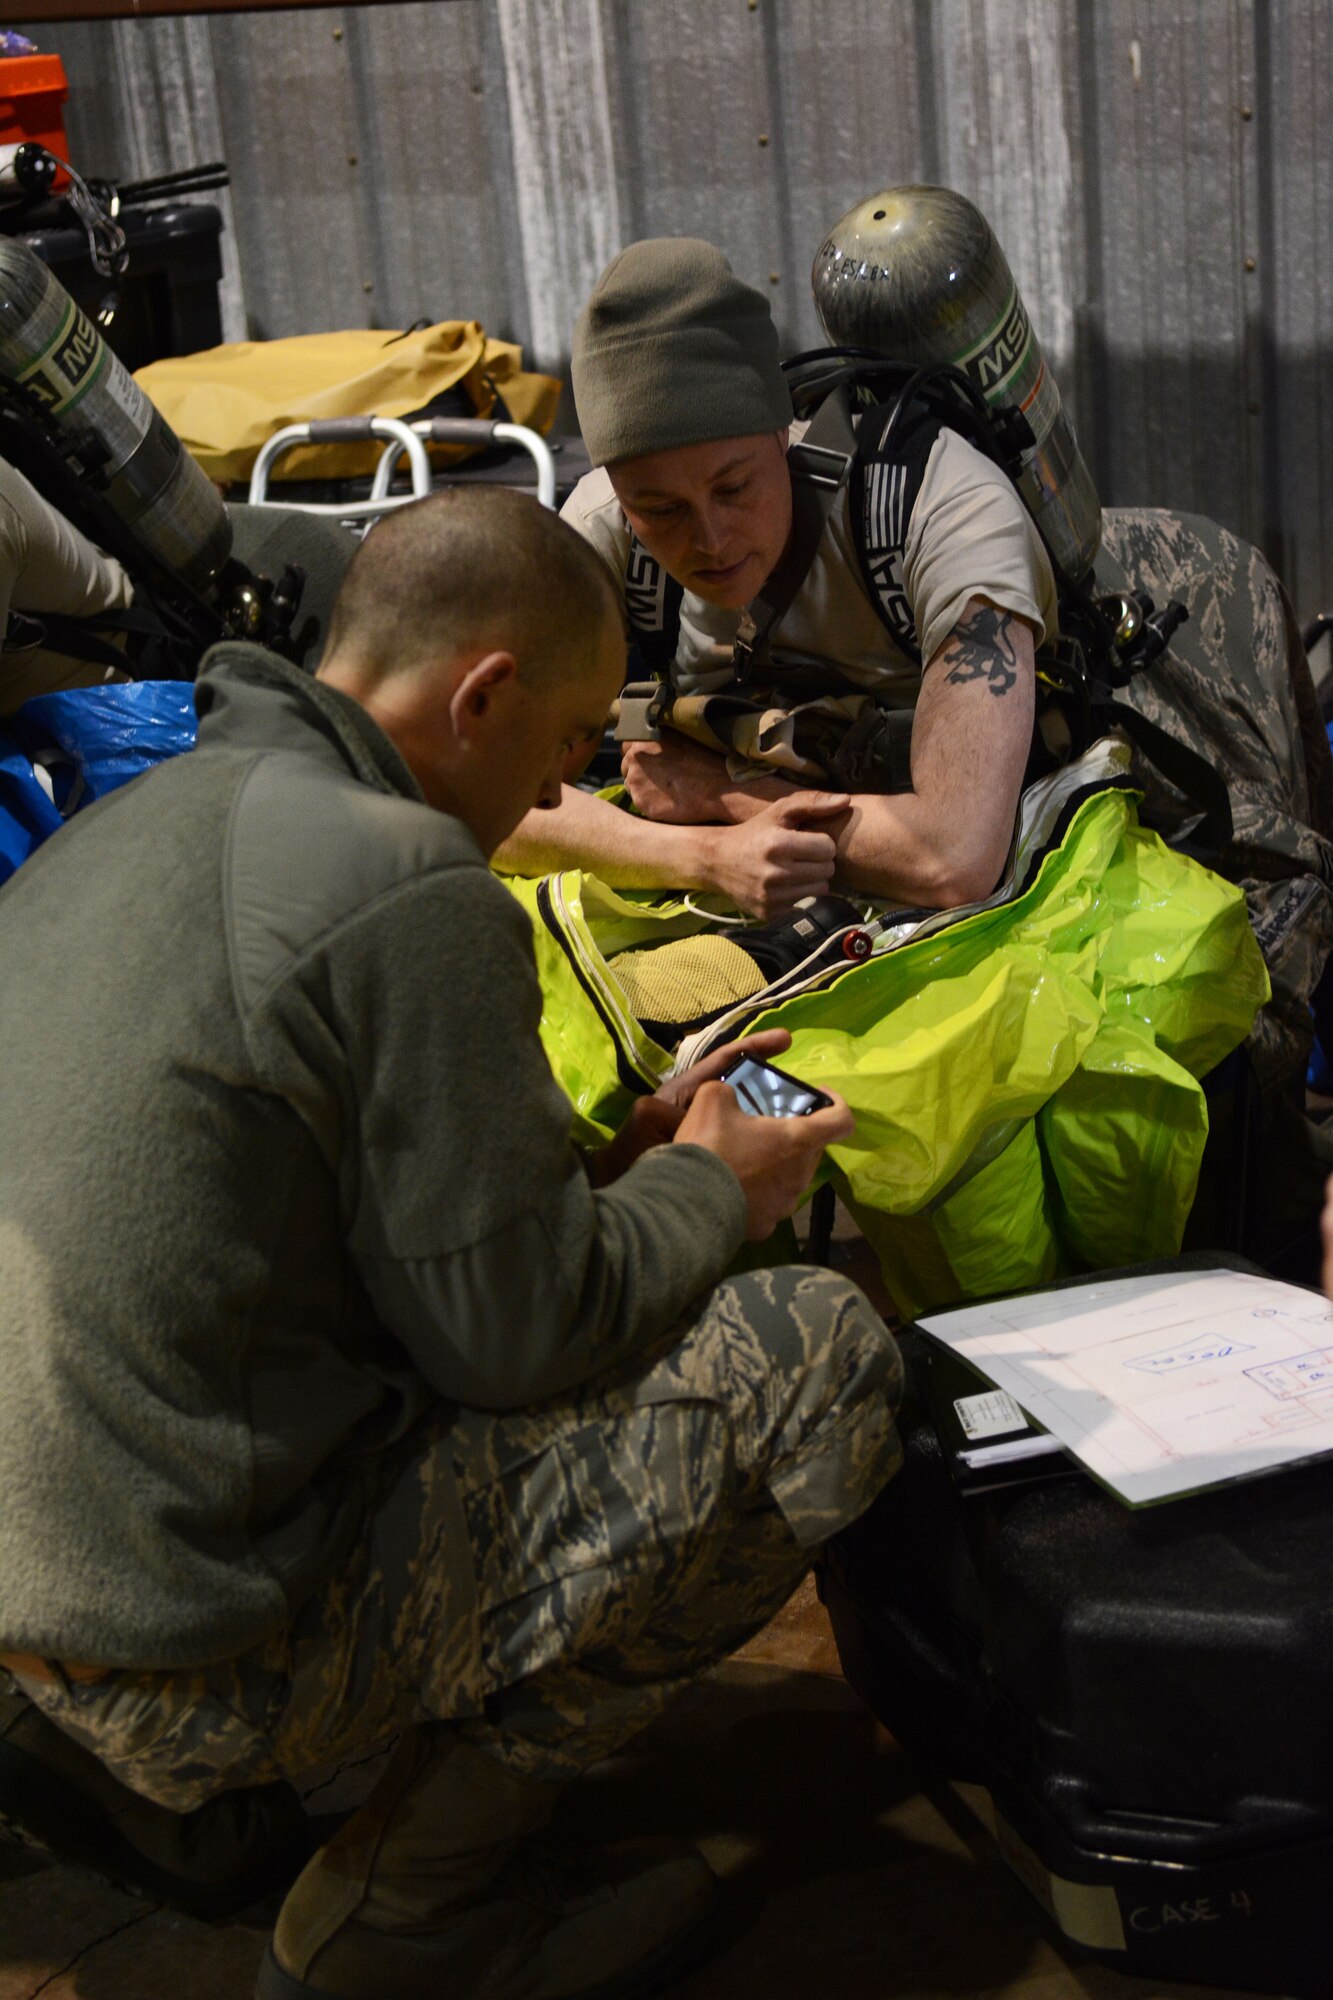 Tech. Sgt. Brian Black, 148th emergency management, briefs Staff Sgt. Ryan Dunlap, 127th emergency management on the objectives of the response prior to suiting up during a field training exercise at Volk Field Air National Guard Base, Wis., April 4, 2014. Dunlap was part of the second team to go into the training facility, so was responsible for gathering samples in the contaminated area during the exercise. The training exercise was part of emergency management’s annual training requirement. (Air National Guard photo by Senior Airman Andrea F. Liechti)